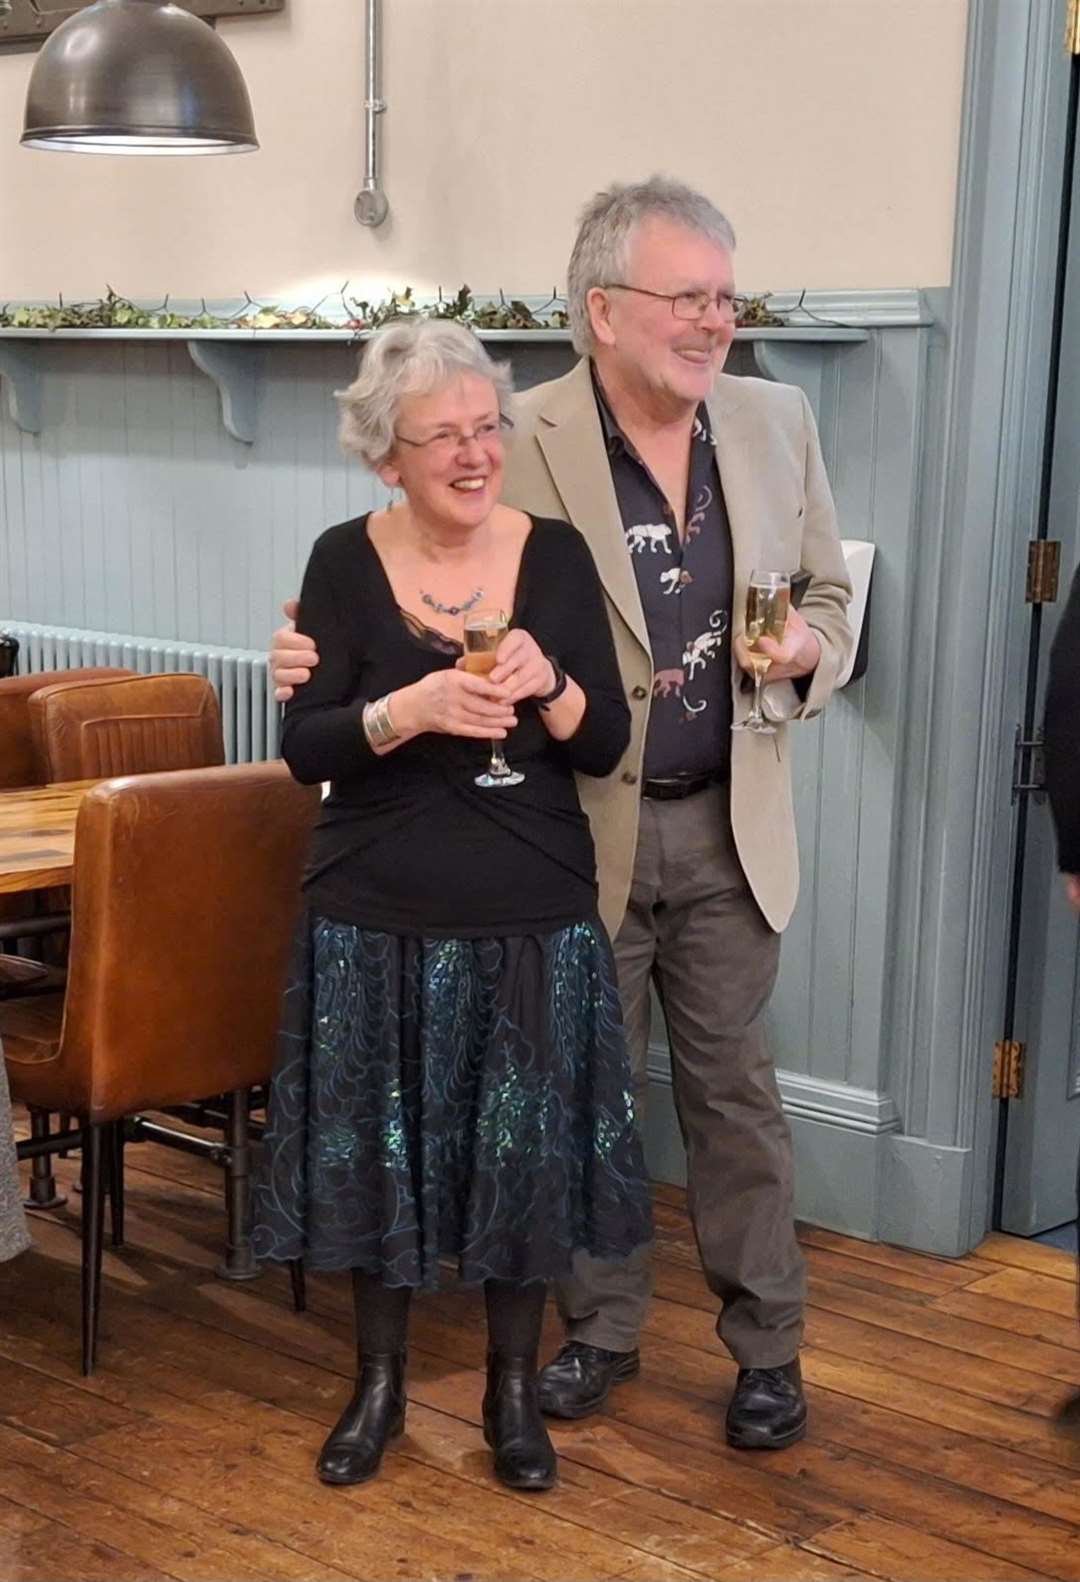 Joan and her husband Jerry arrive at the surprise party.